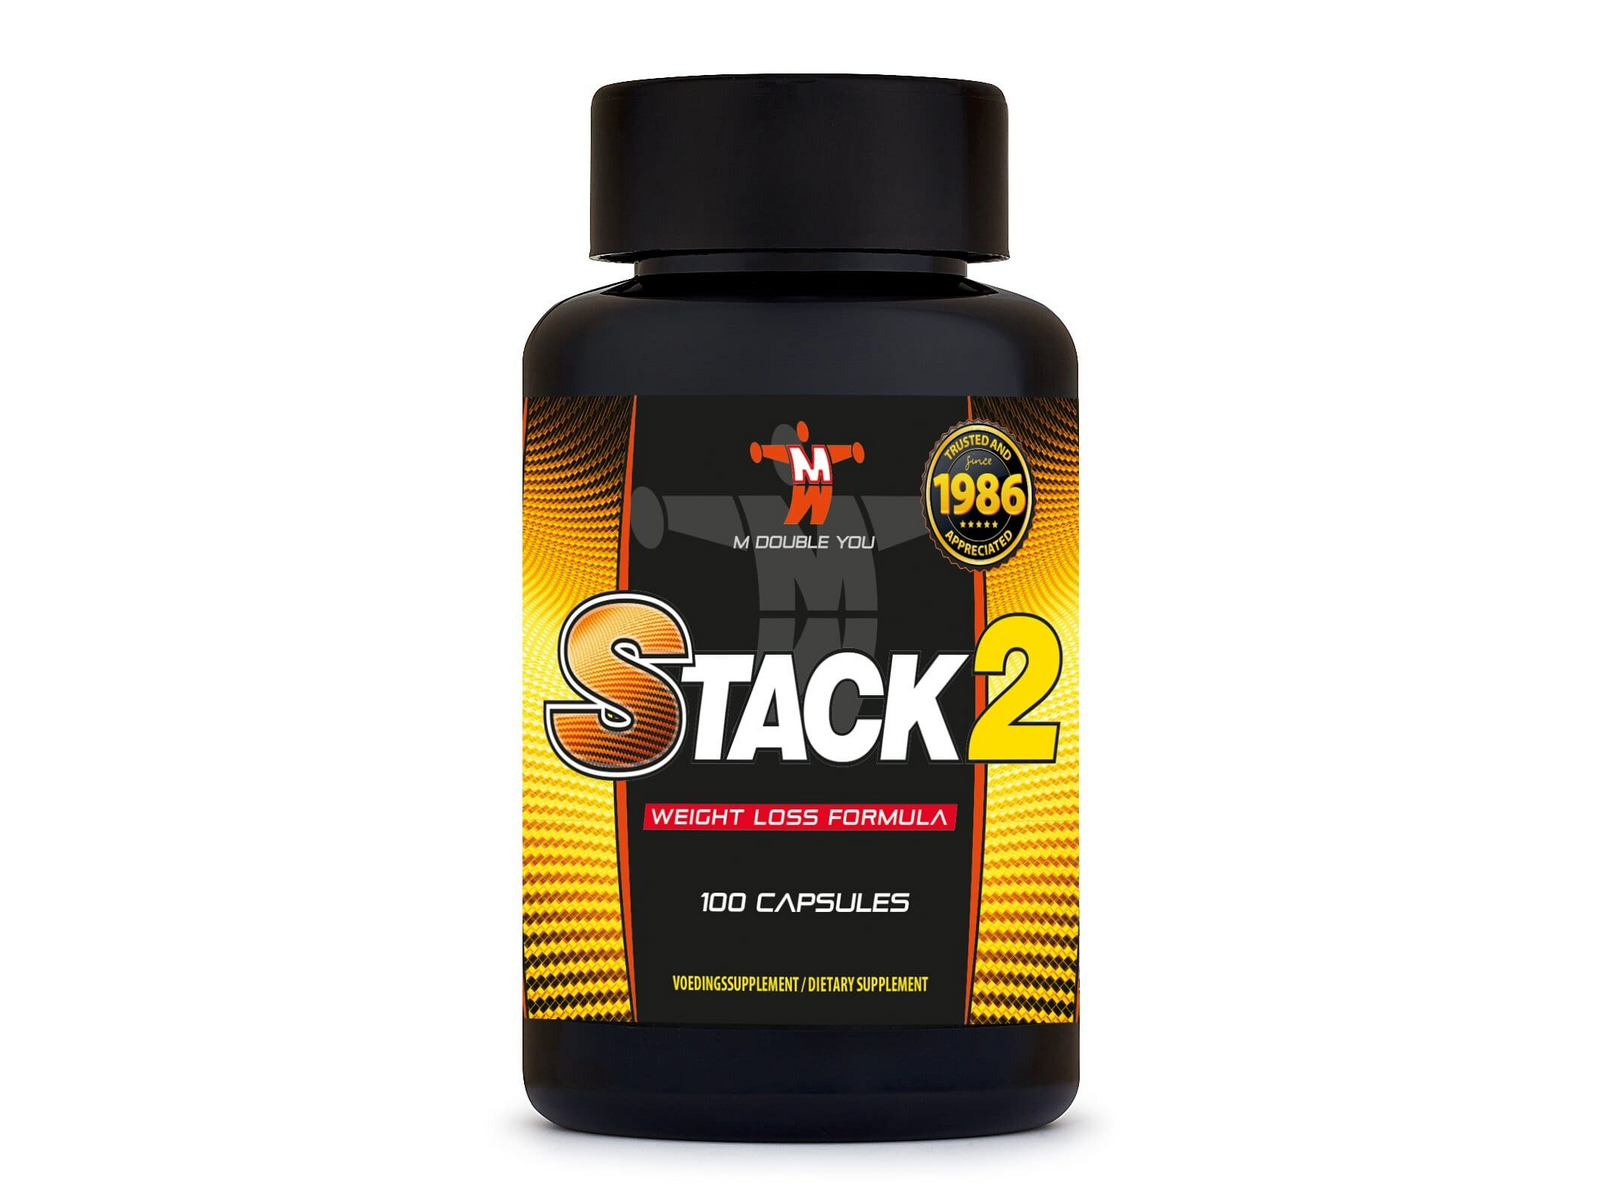 M DOUBLE YOU - Stack 2 (100 capsules)